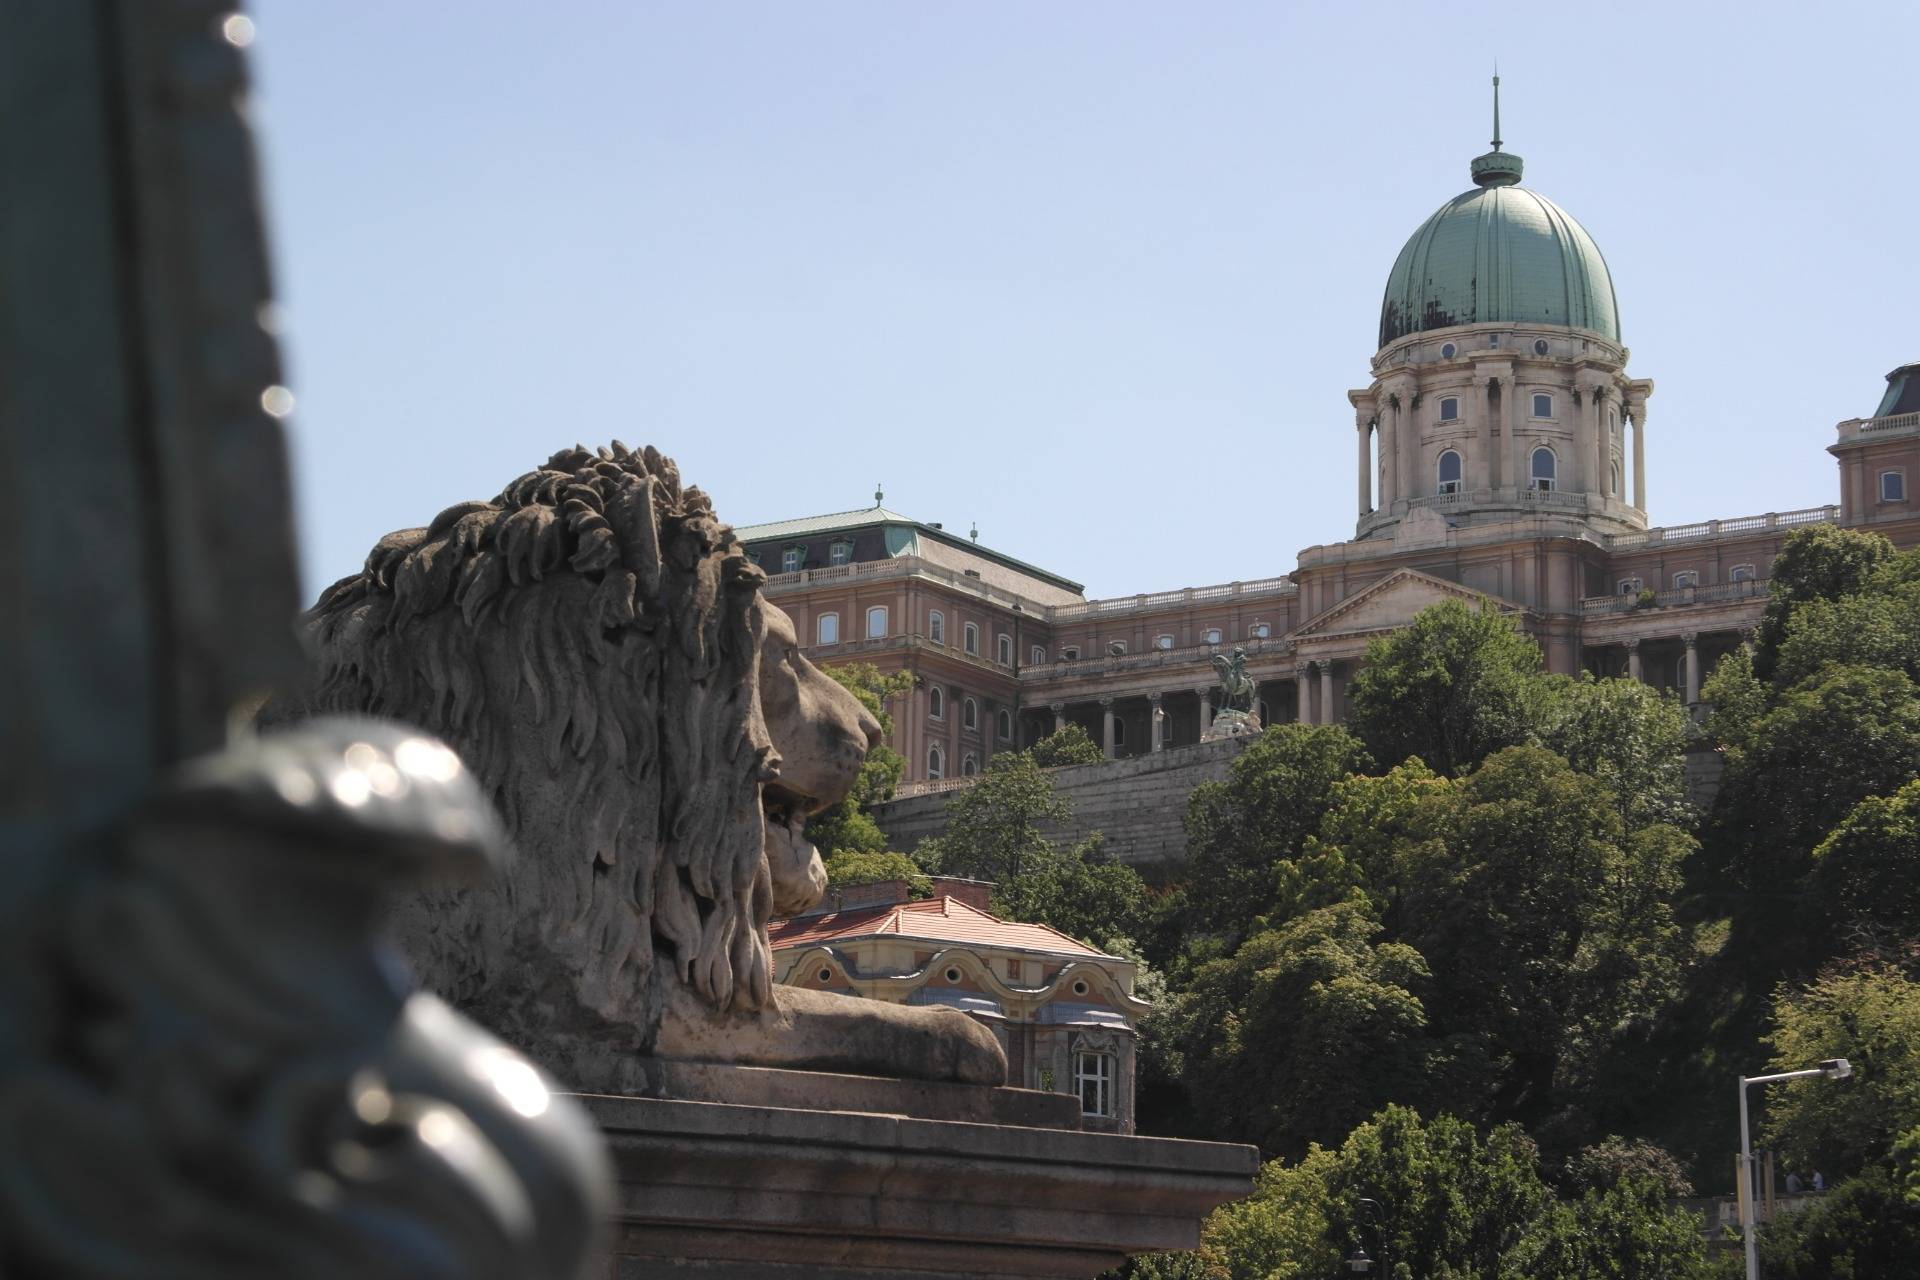 Finishing off with ever-present lions, the guardians of Budapest.